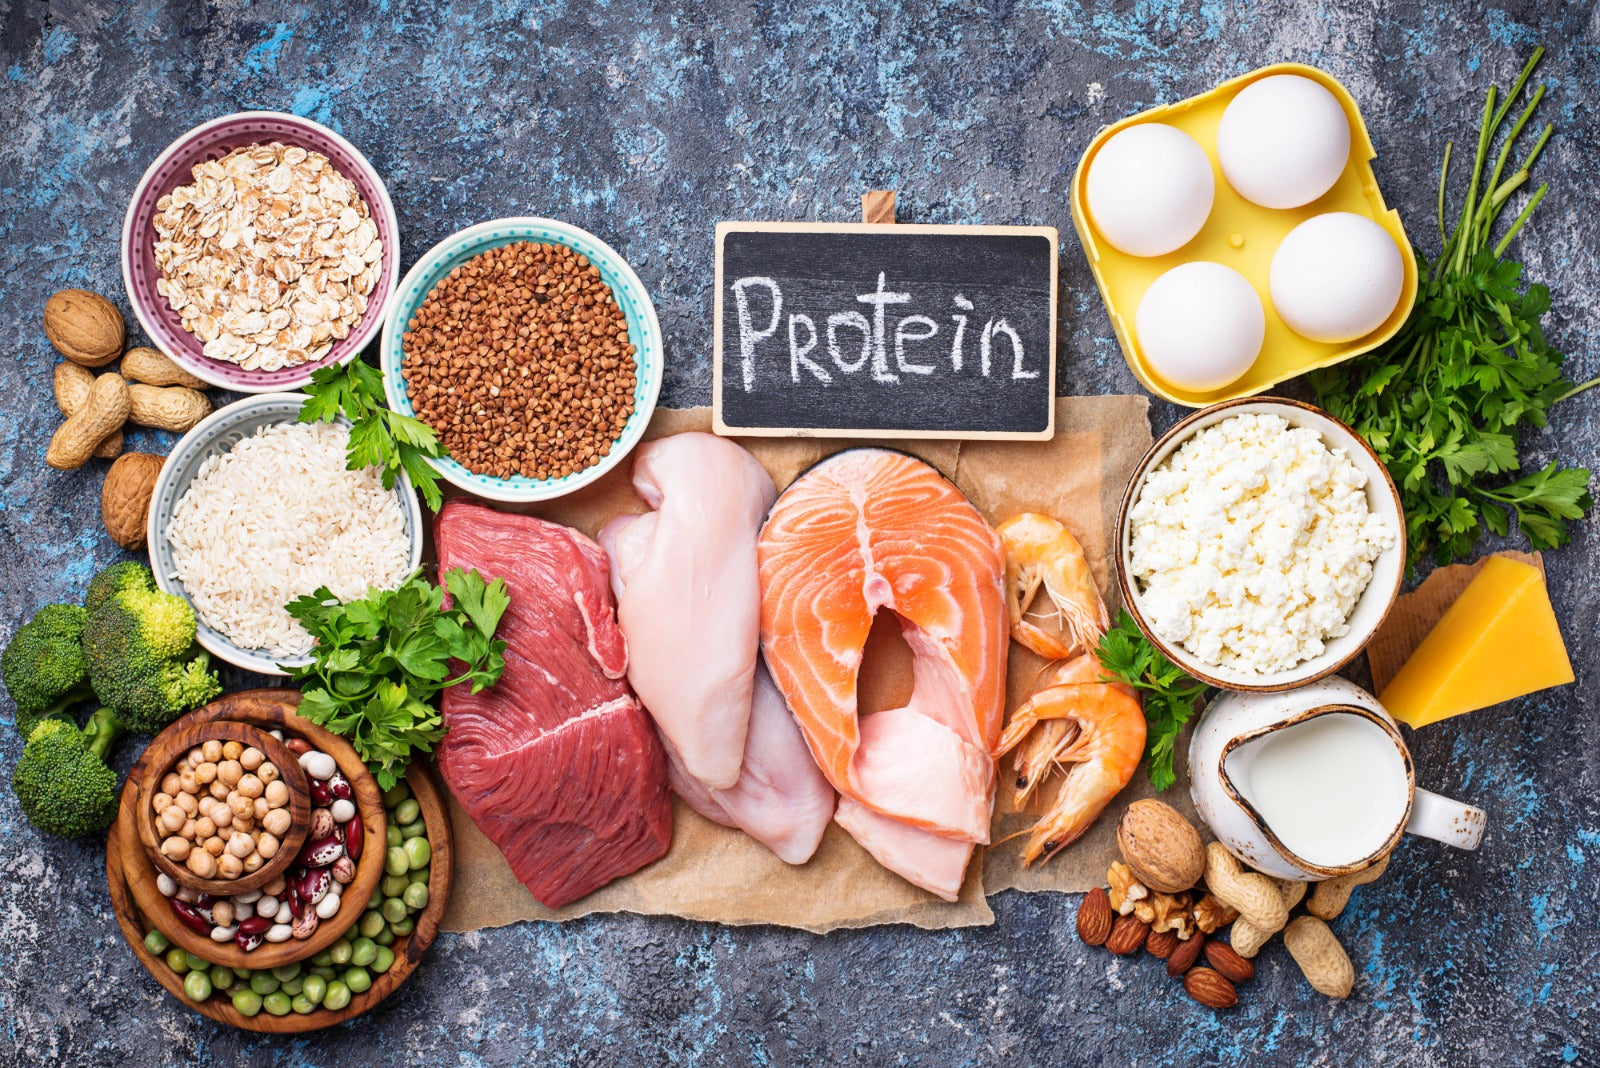 What are some common protein myths?